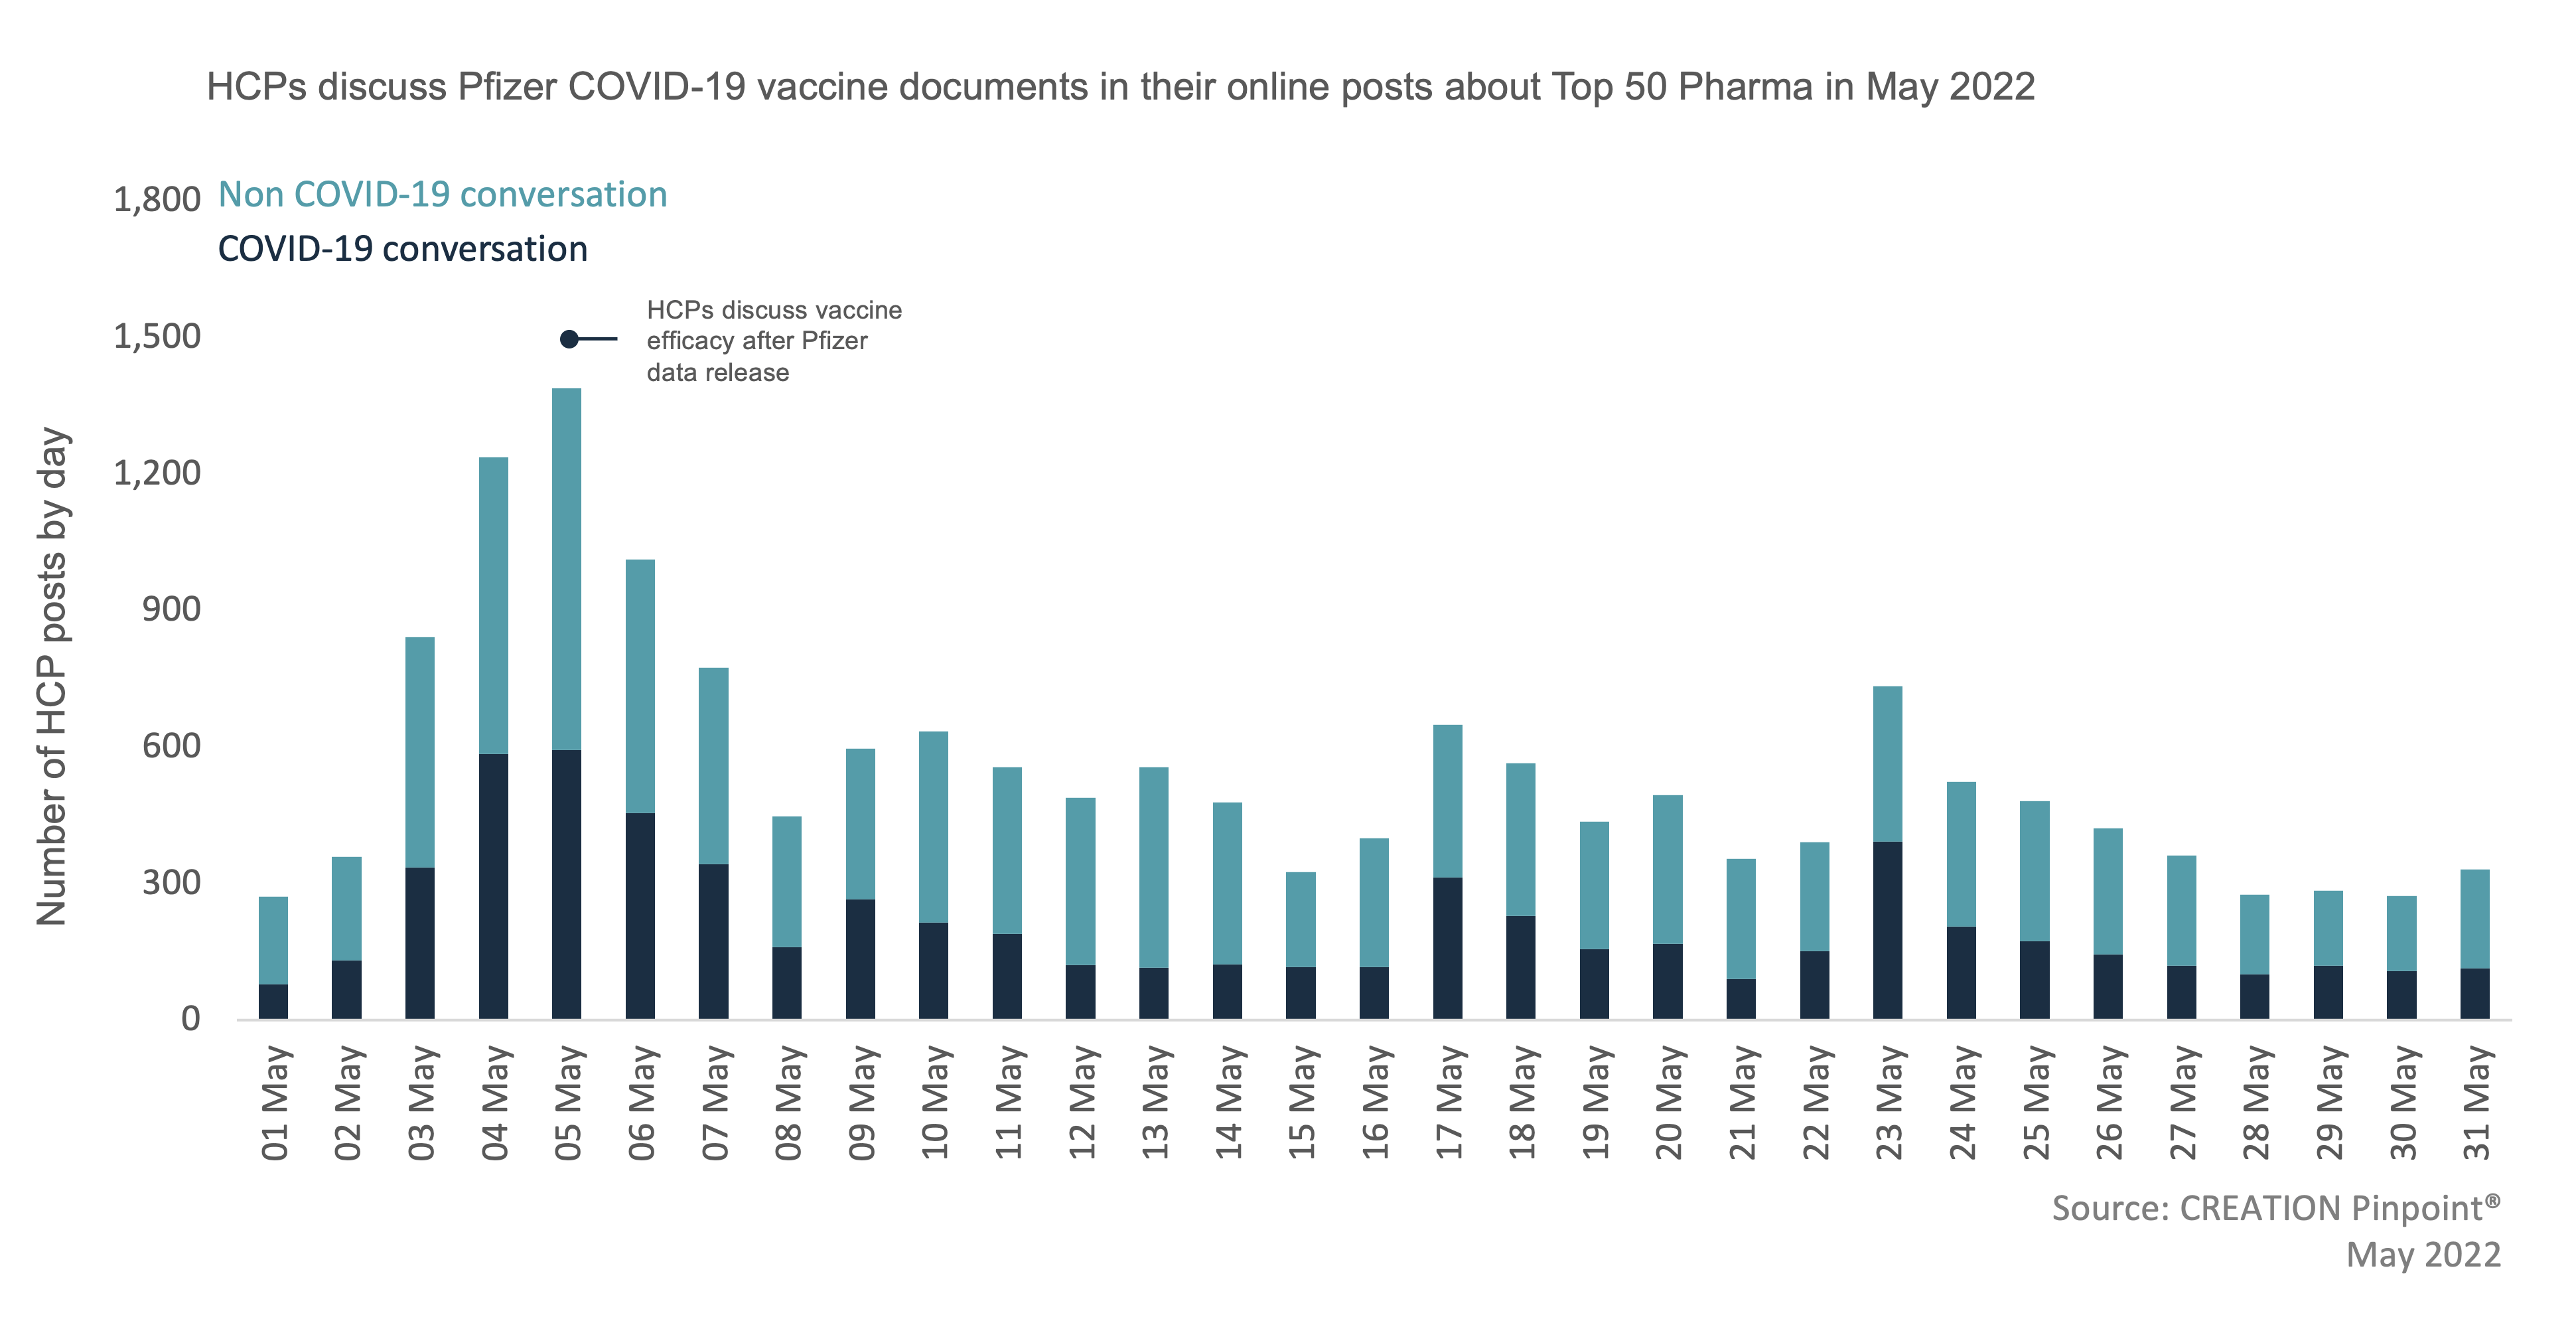 Graph showing HCPs dicussing Pfizer COVID-19 documents